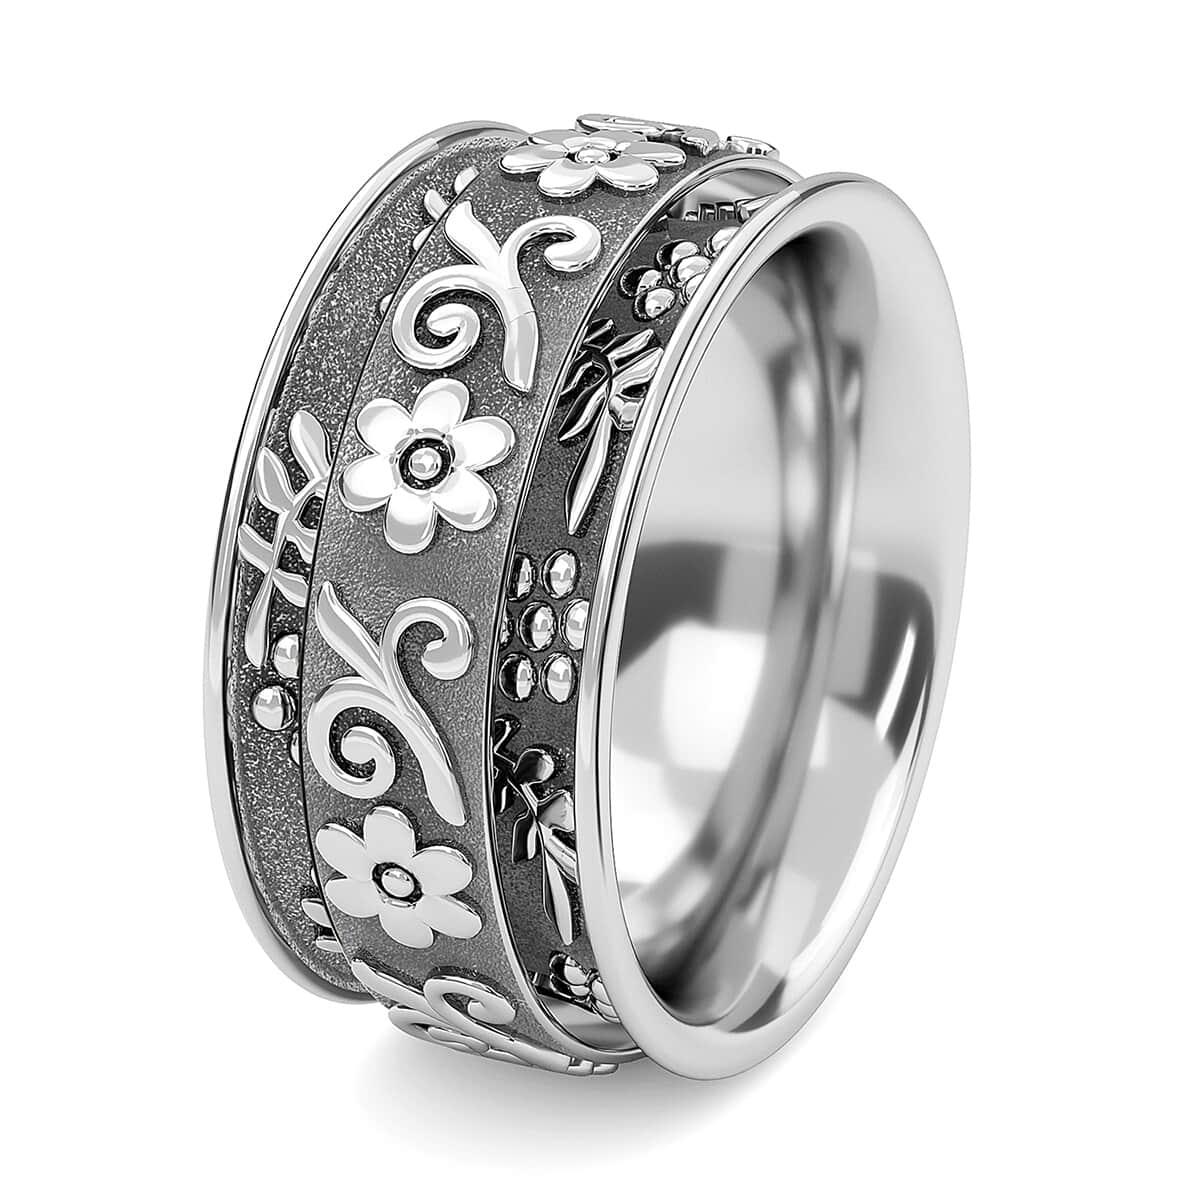 Artisan Crafted Sterling Silver Spinner Ring, Anxiety Ring for Women, Fidget Rings for Anxiety for Women, Stress Relieving Anxiety Ring (Size 6.0) (4.25 g) image number 5